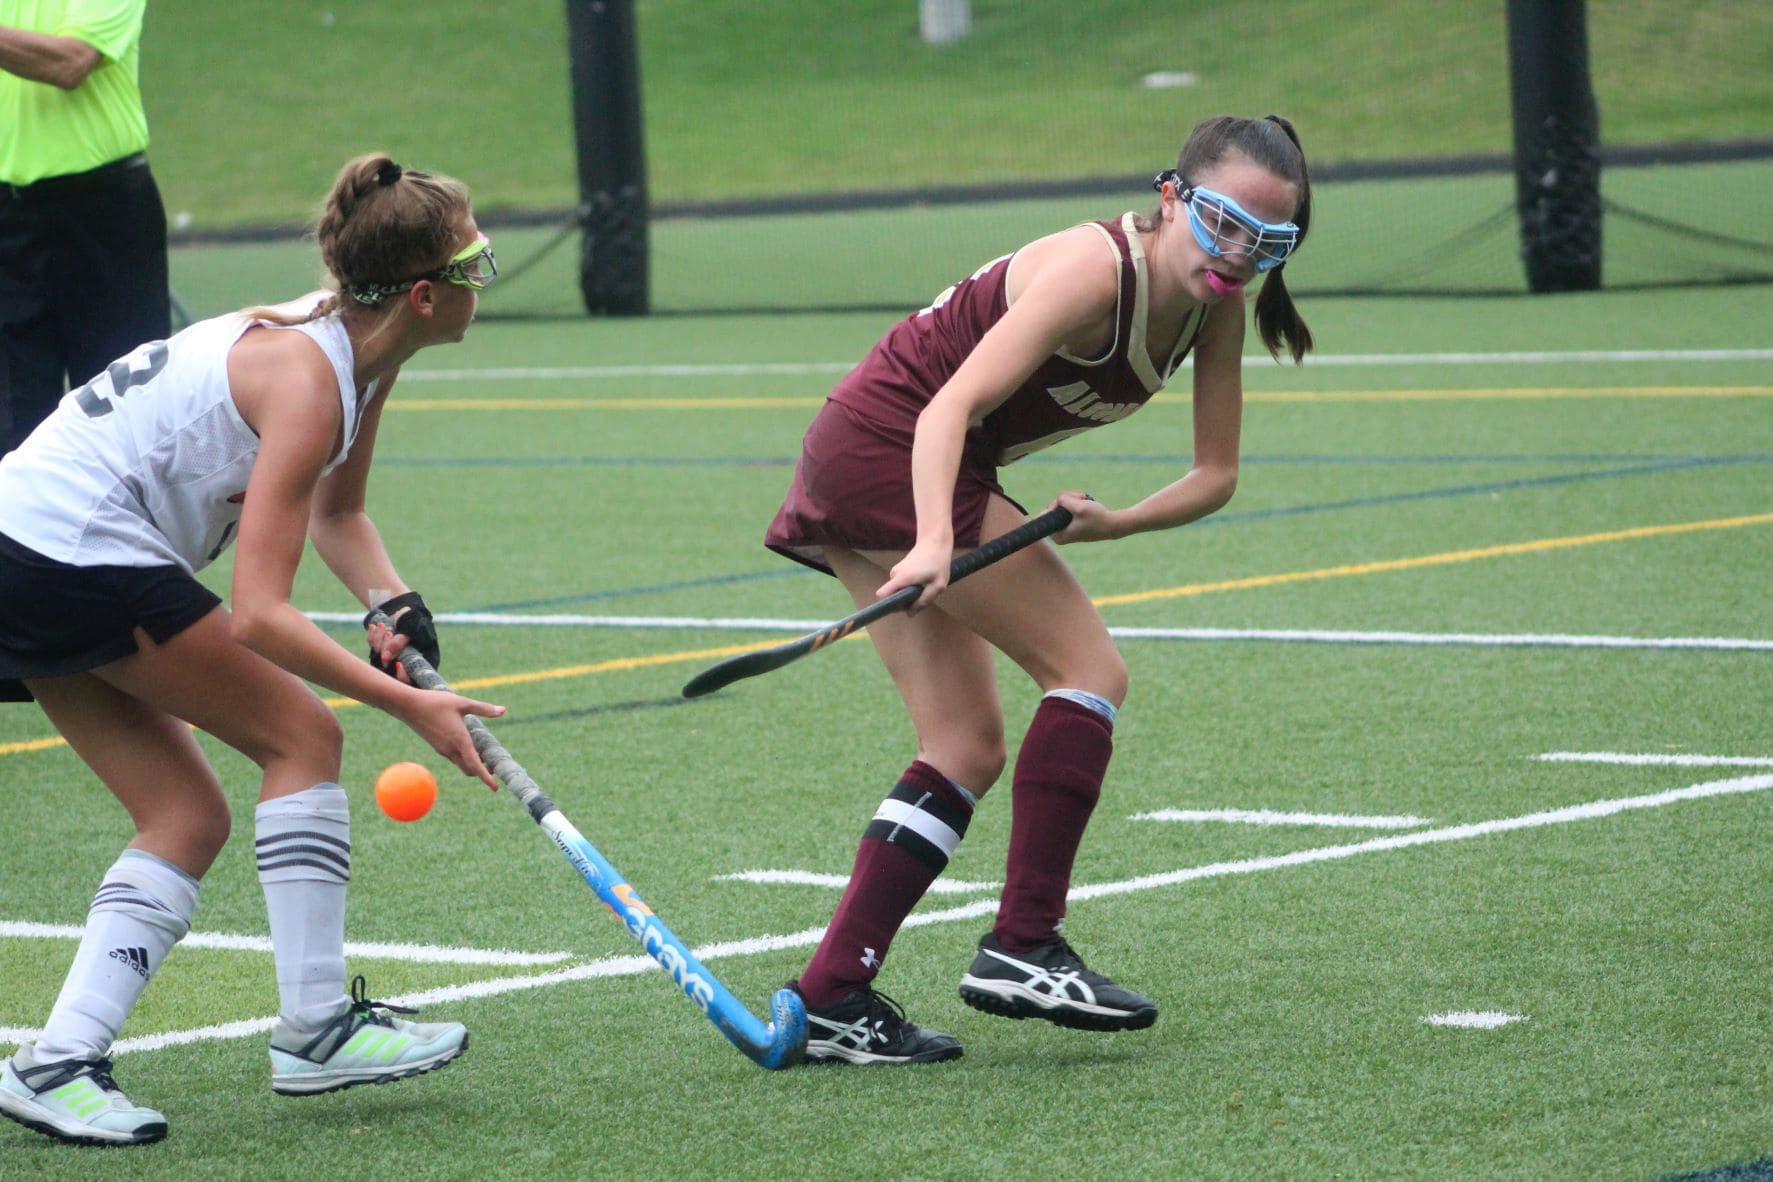 An Algonquin player reaches back to corral a ball away from a Marlborough player, last week.